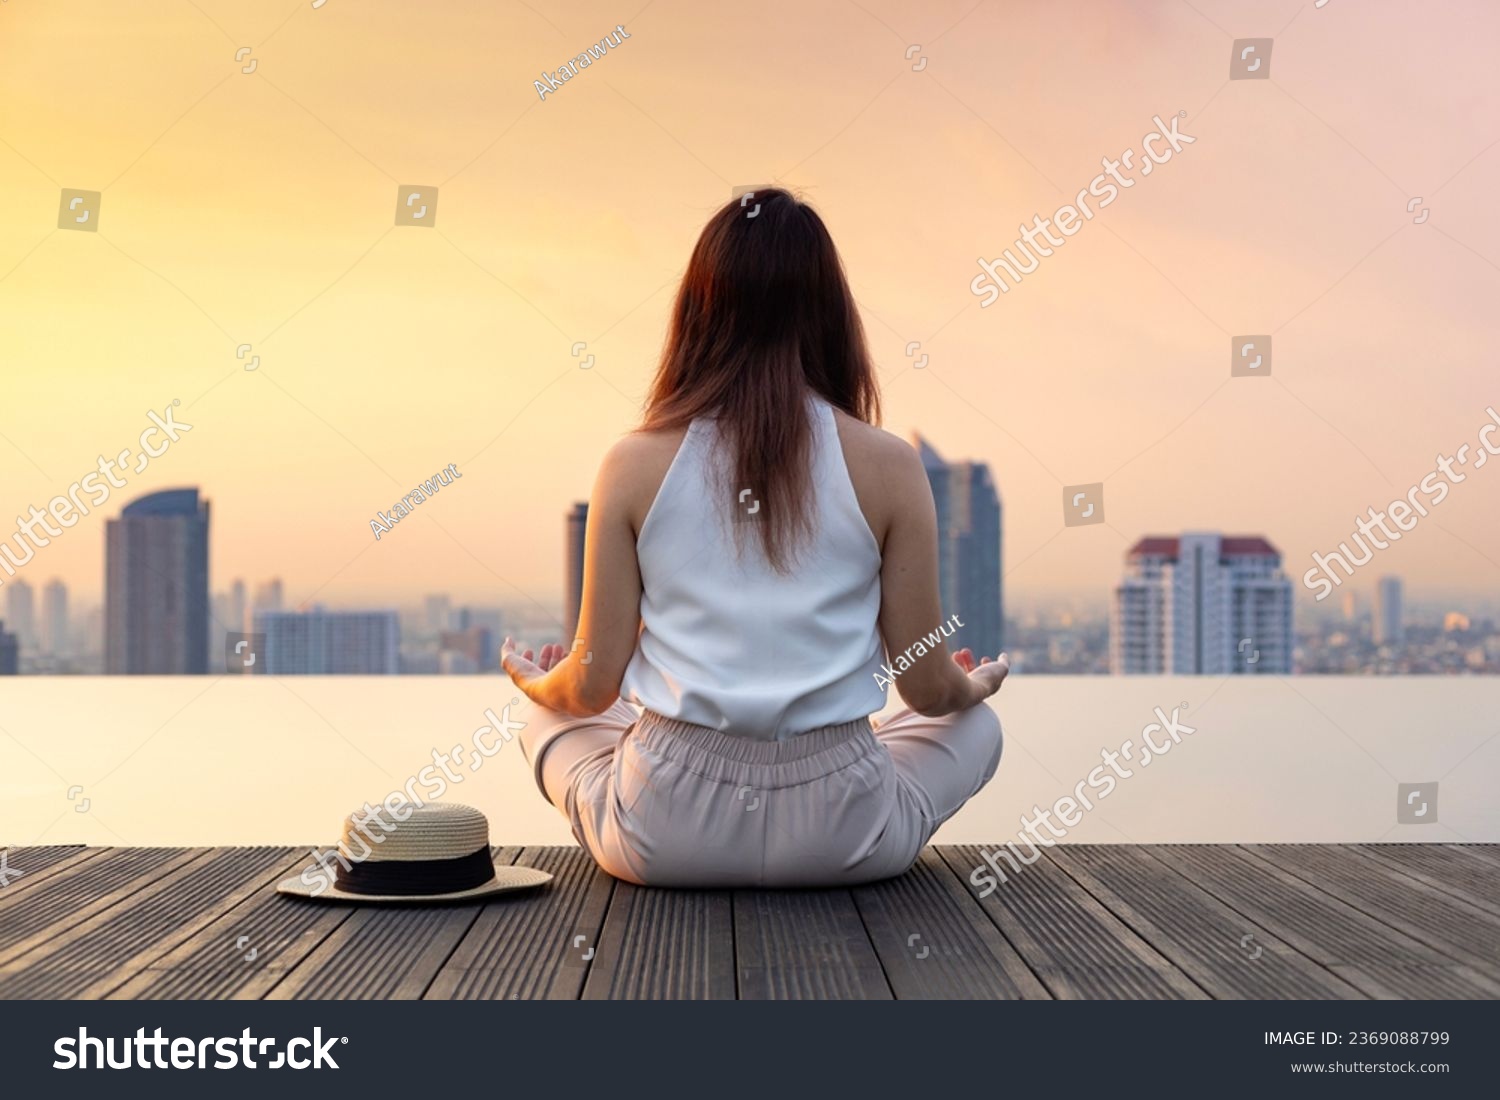 Back of woman relaxingly practicing meditation at the swimming pool rooftop with view of urban skyline building to attain happiness from inner peace wisdom #2369088799